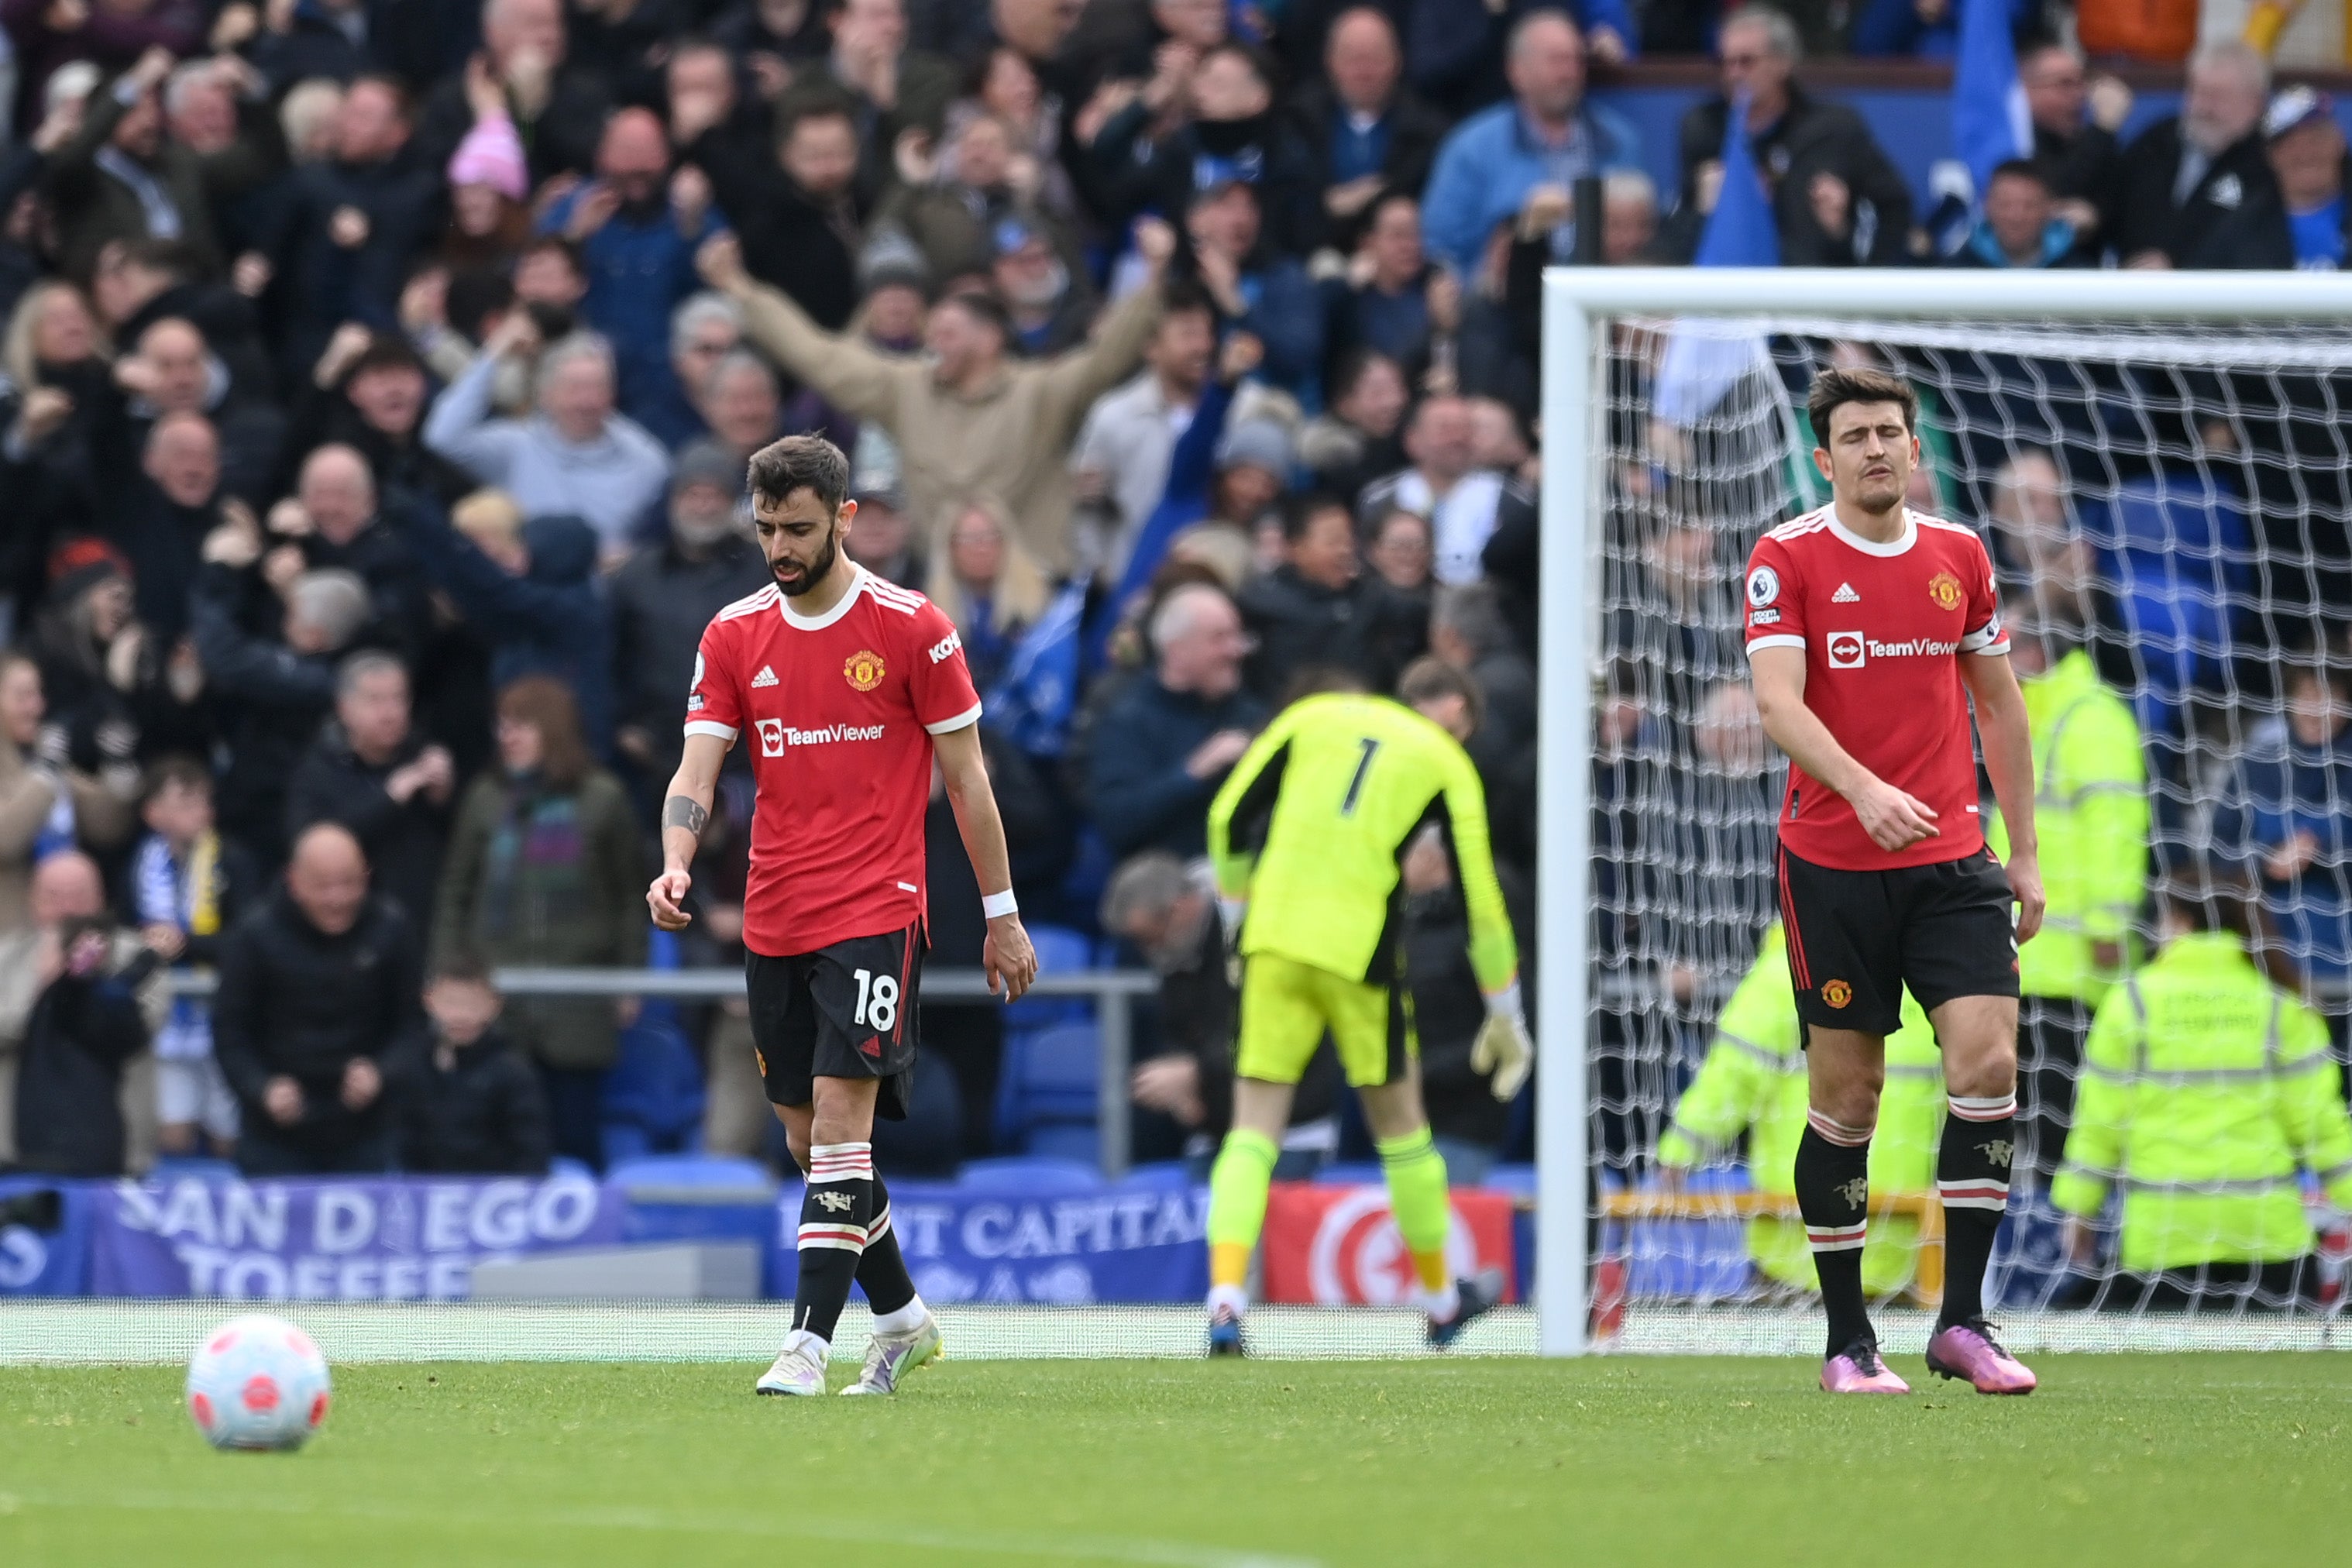 Manchester United were dreadful once again in the defeat to Everton.